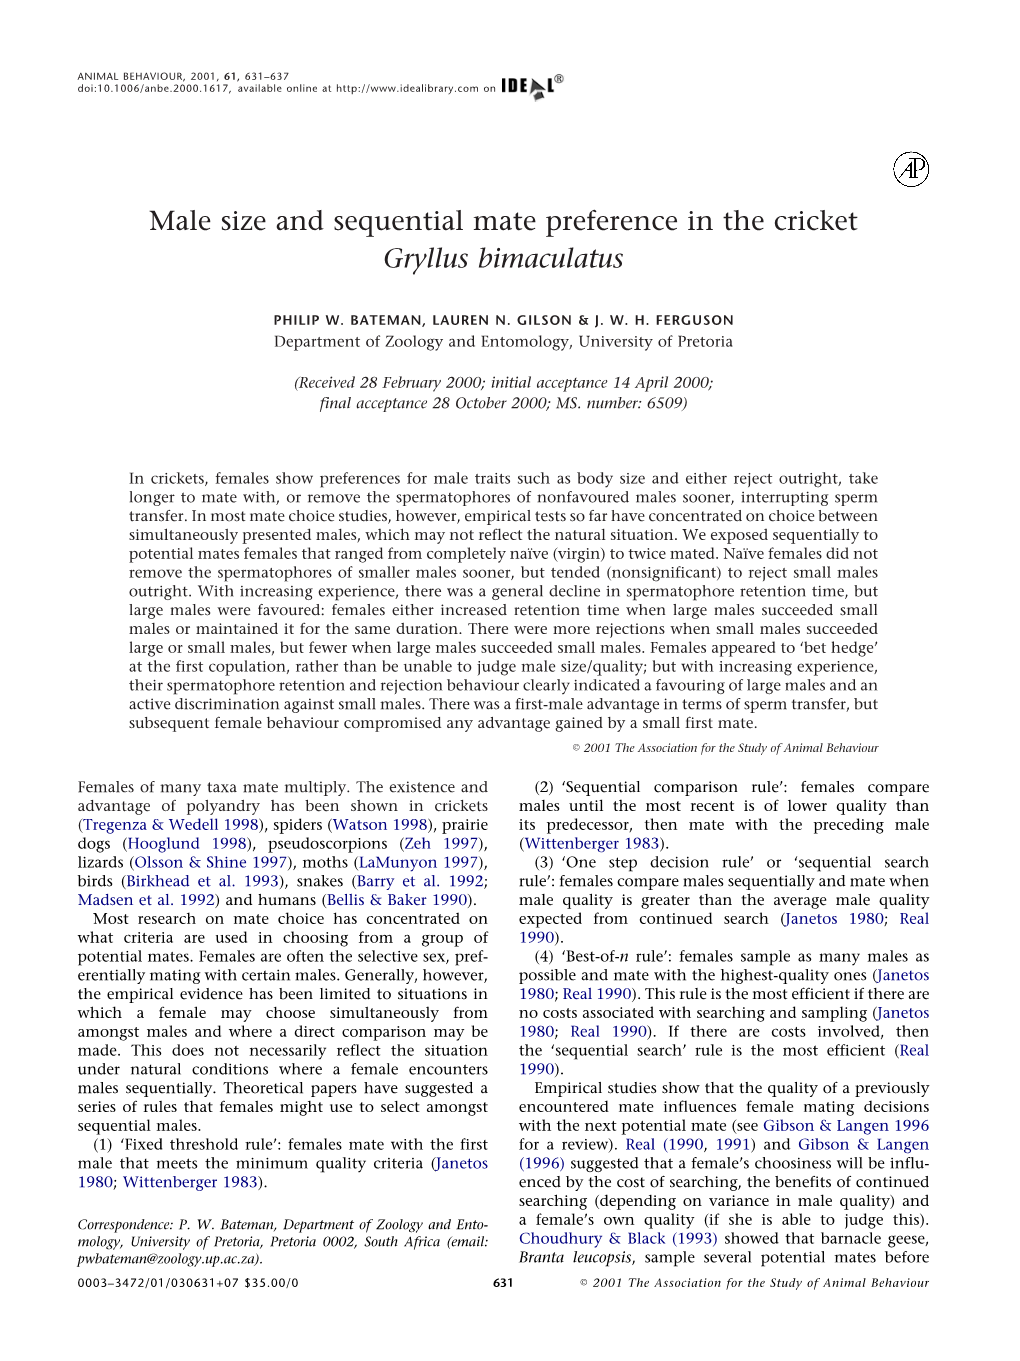 Male Size and Sequential Mate Preference in the Cricket Gryllus Bimaculatus